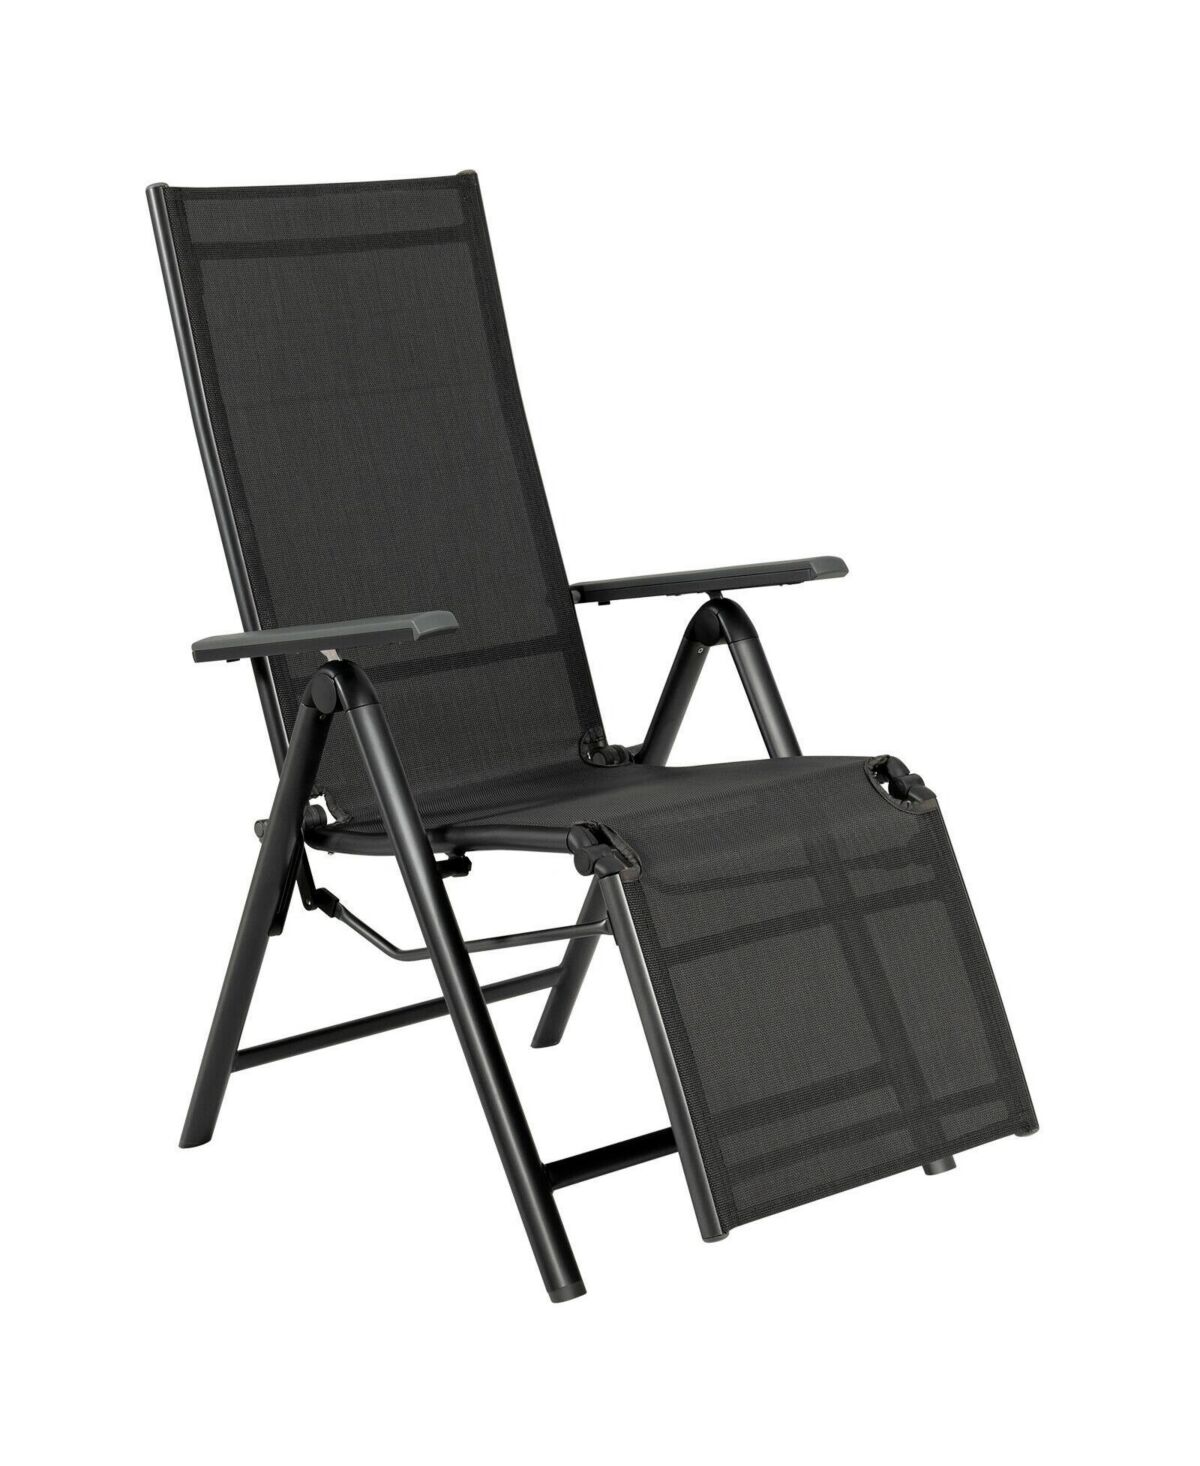 Sugift Outdoor Folding Lounge Chair with 7 Adjustable Backrest and Footrest Positions-Gray - Black